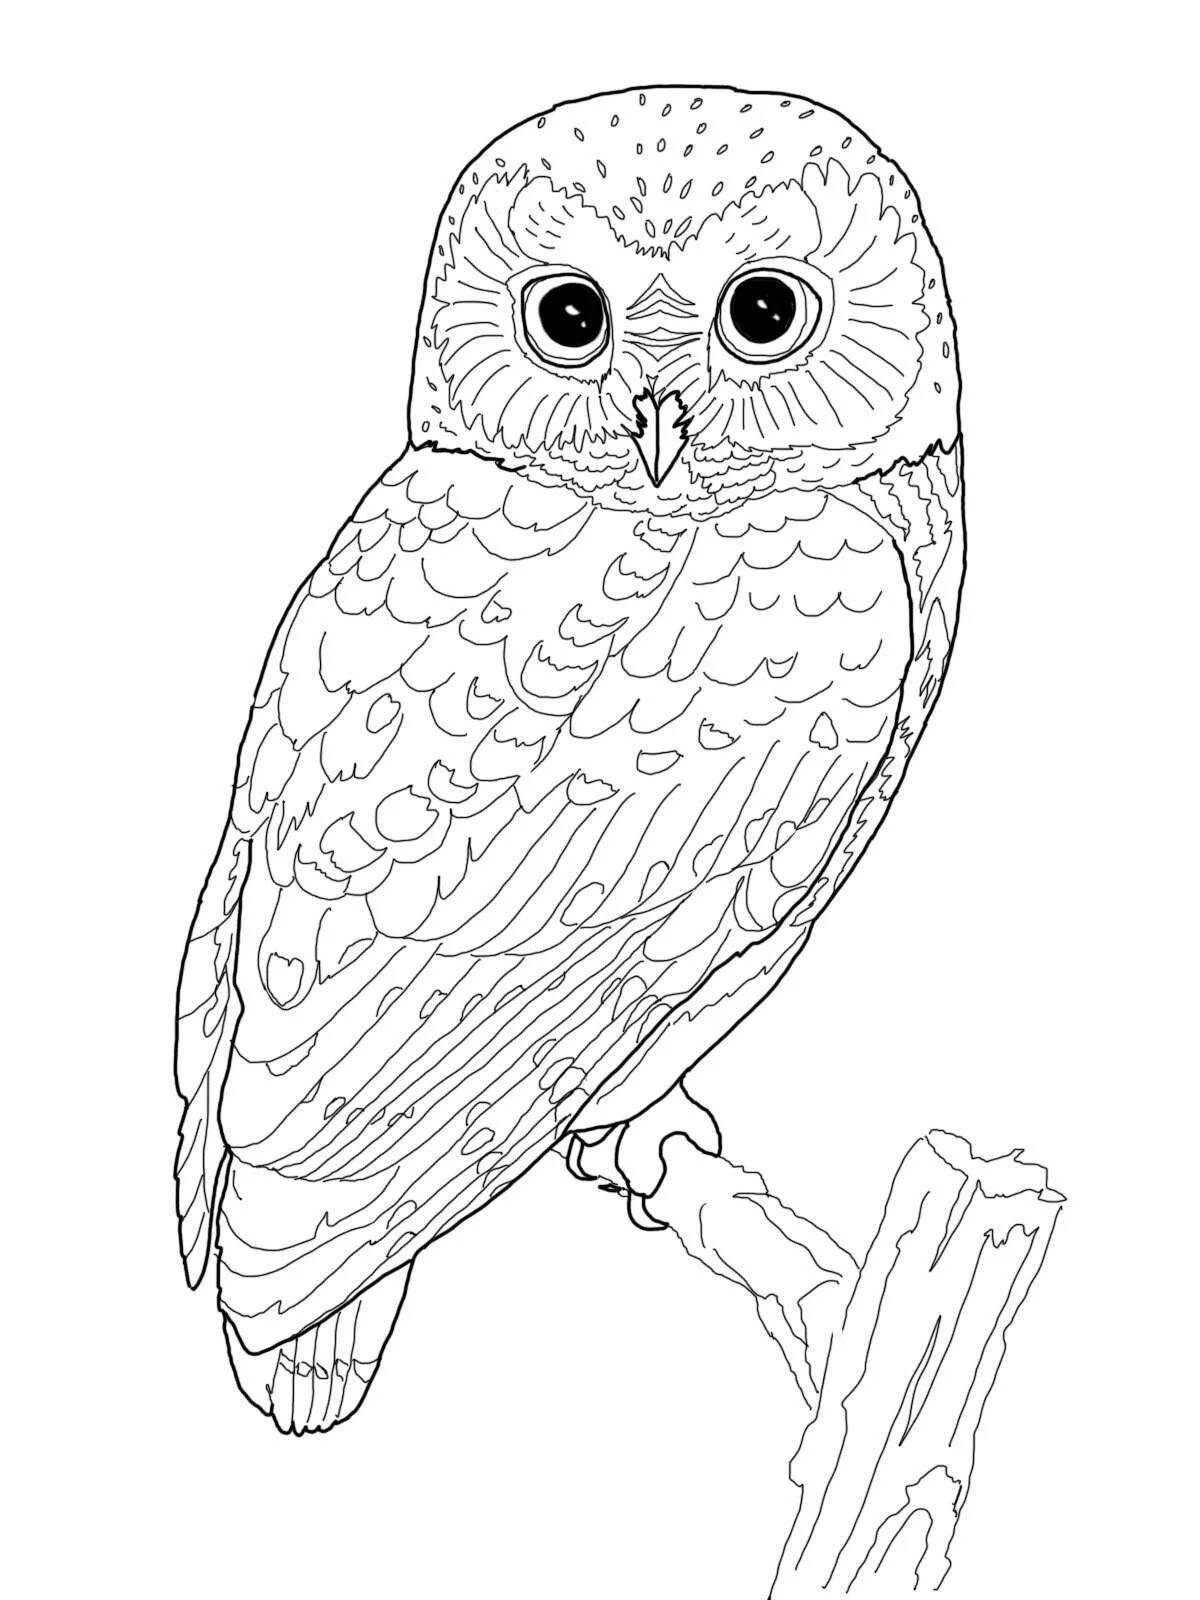 Playful Owl Coloring Page for Preschoolers